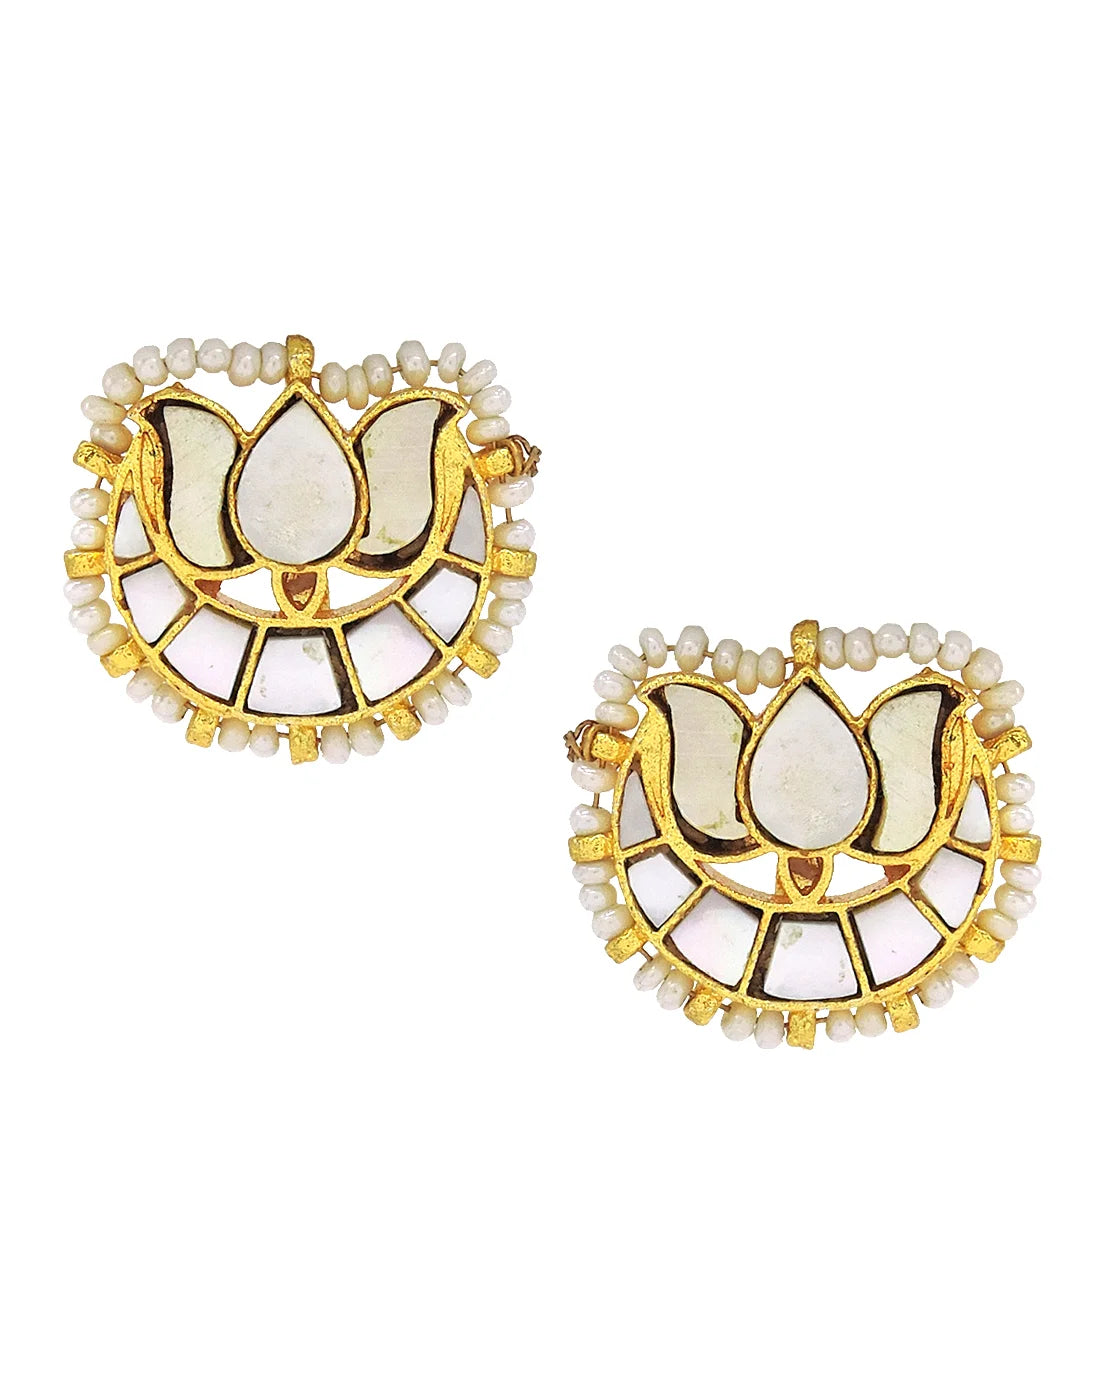 Pearl & Shell Lotus Cluster Earrings- Handcrafted Jewellery from Dori